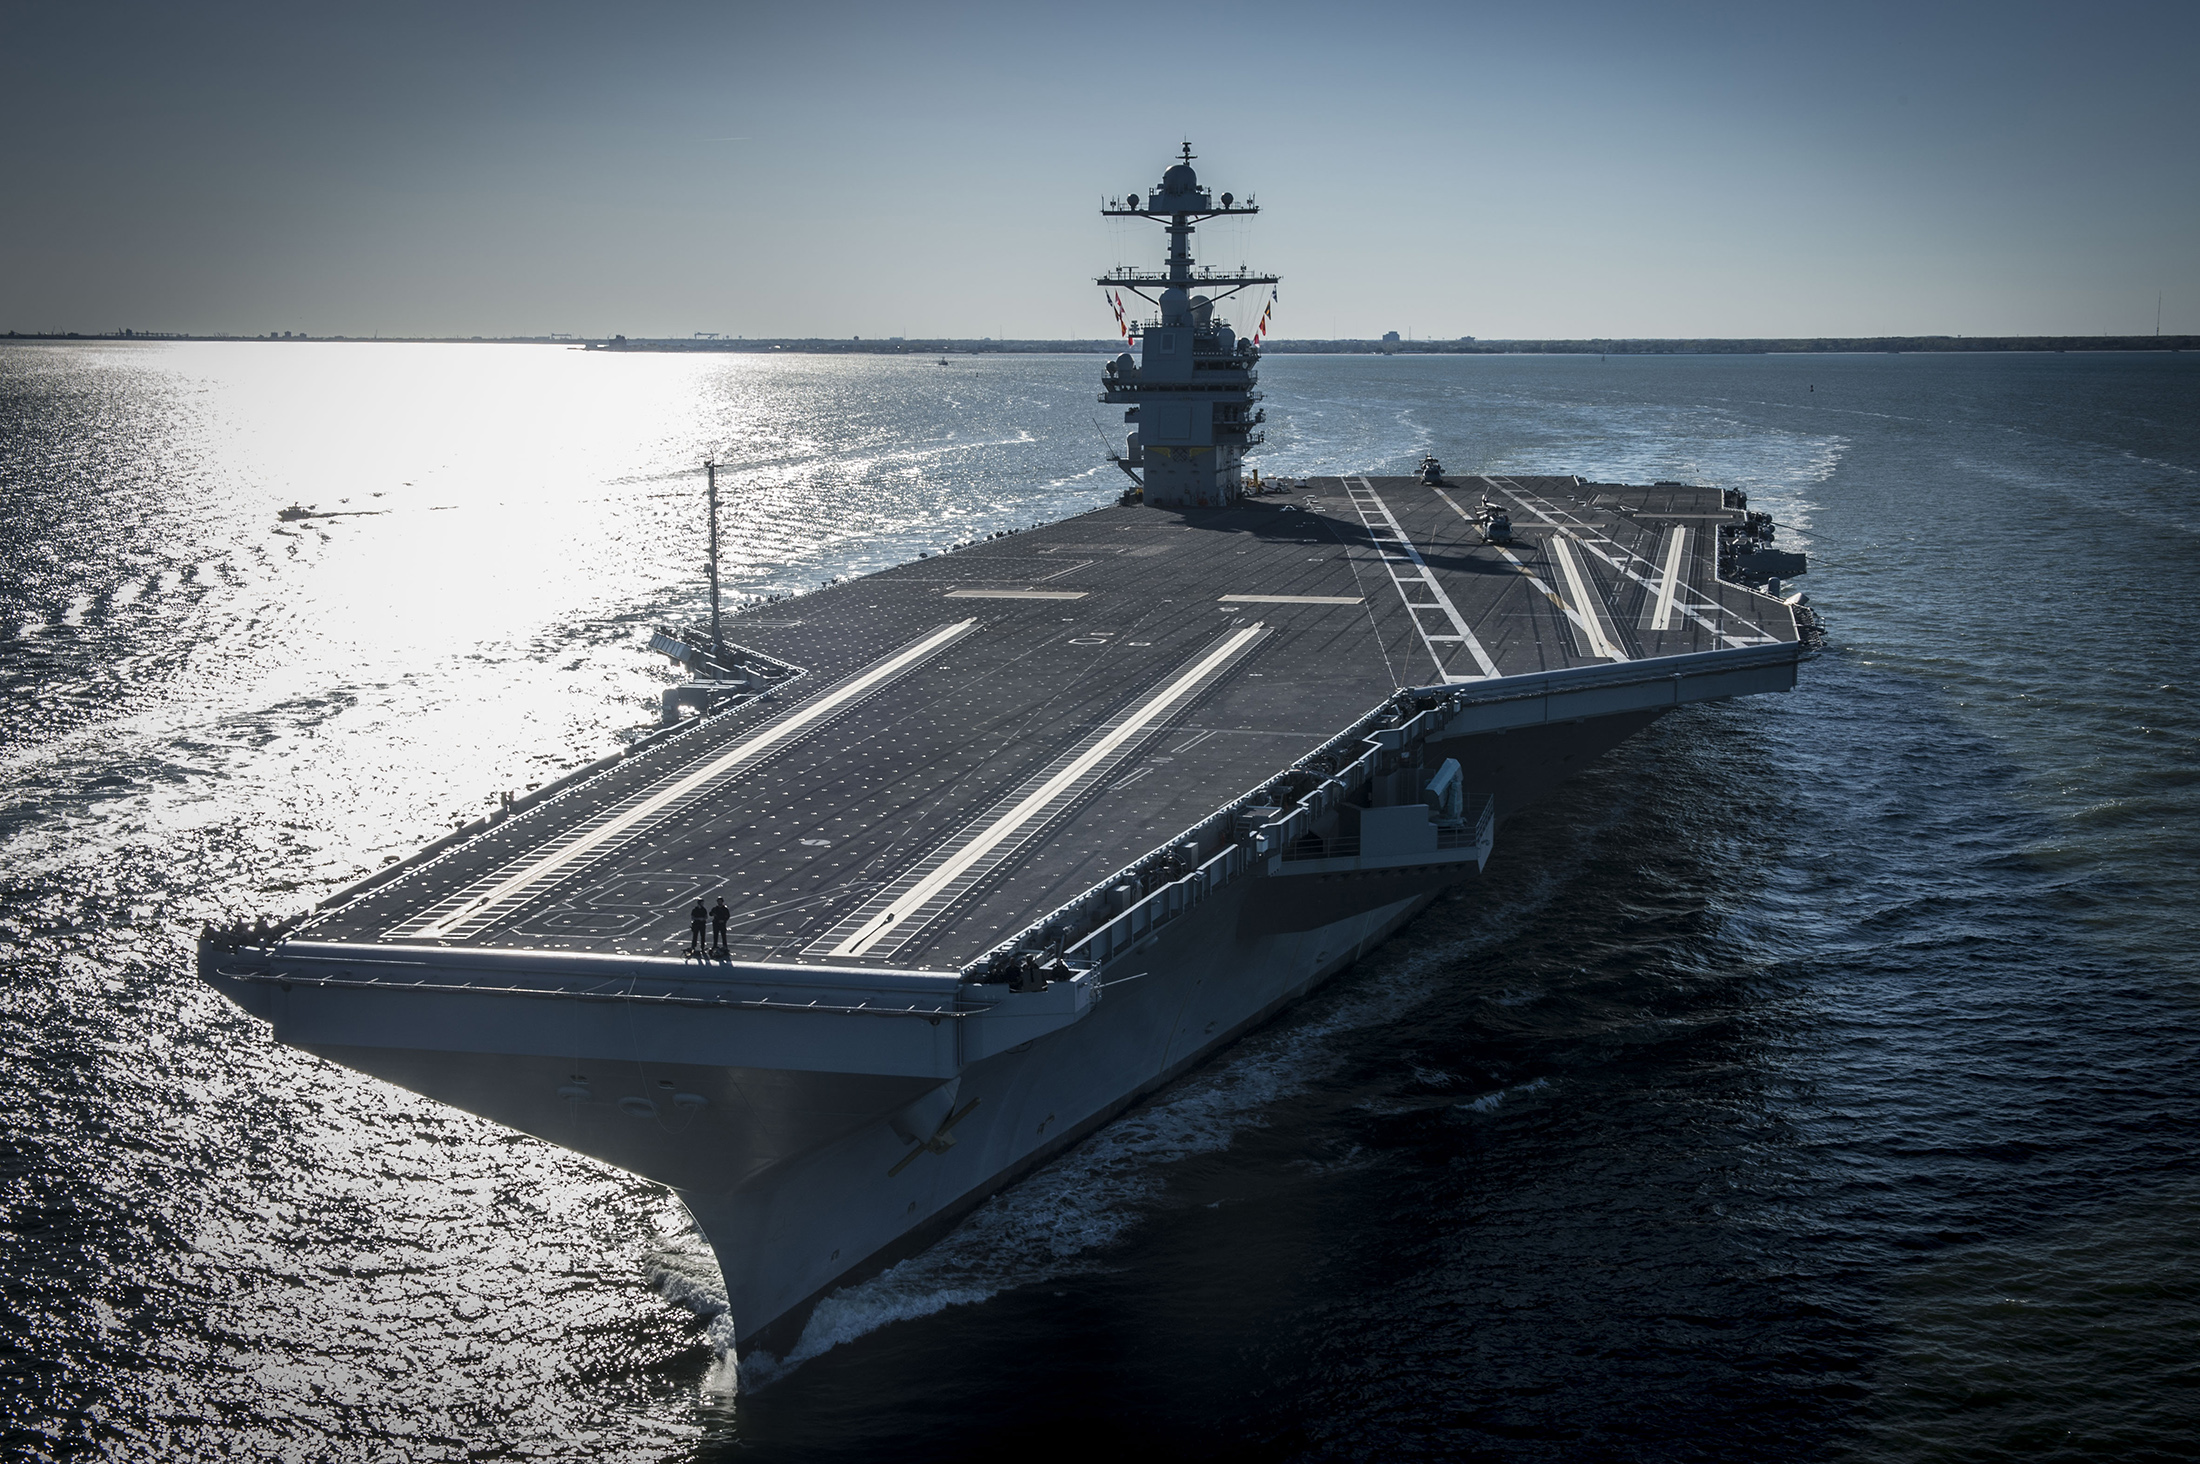 U.s. Navy's $13 Billion Warship Gerald R. Ford Sows Doubt It Can Defend  Itself - Bloomberg